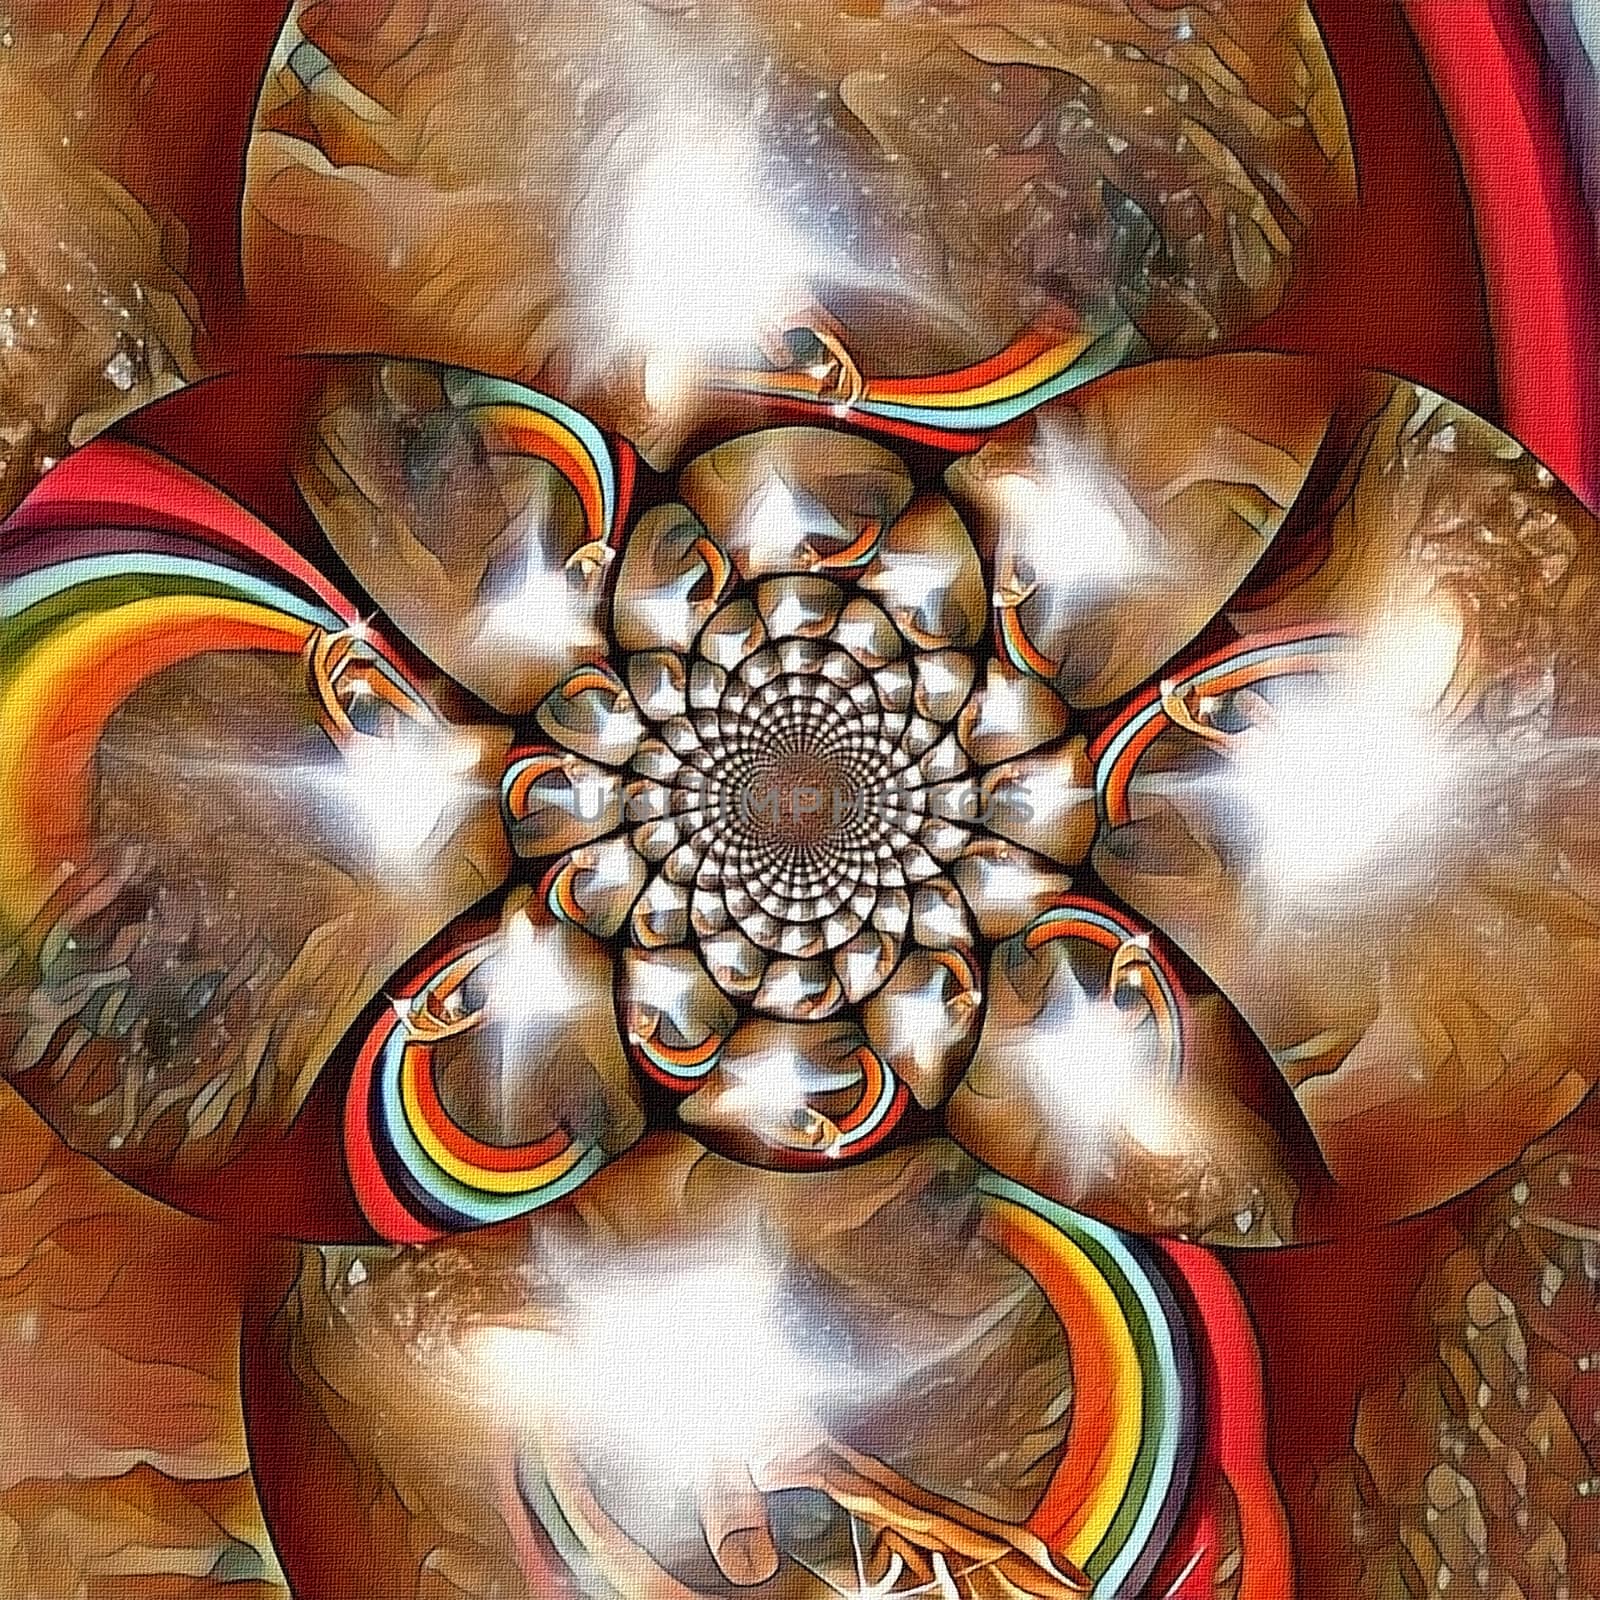 Abstract painting. Mirrored round fractal with God's hands, light and rainbow.